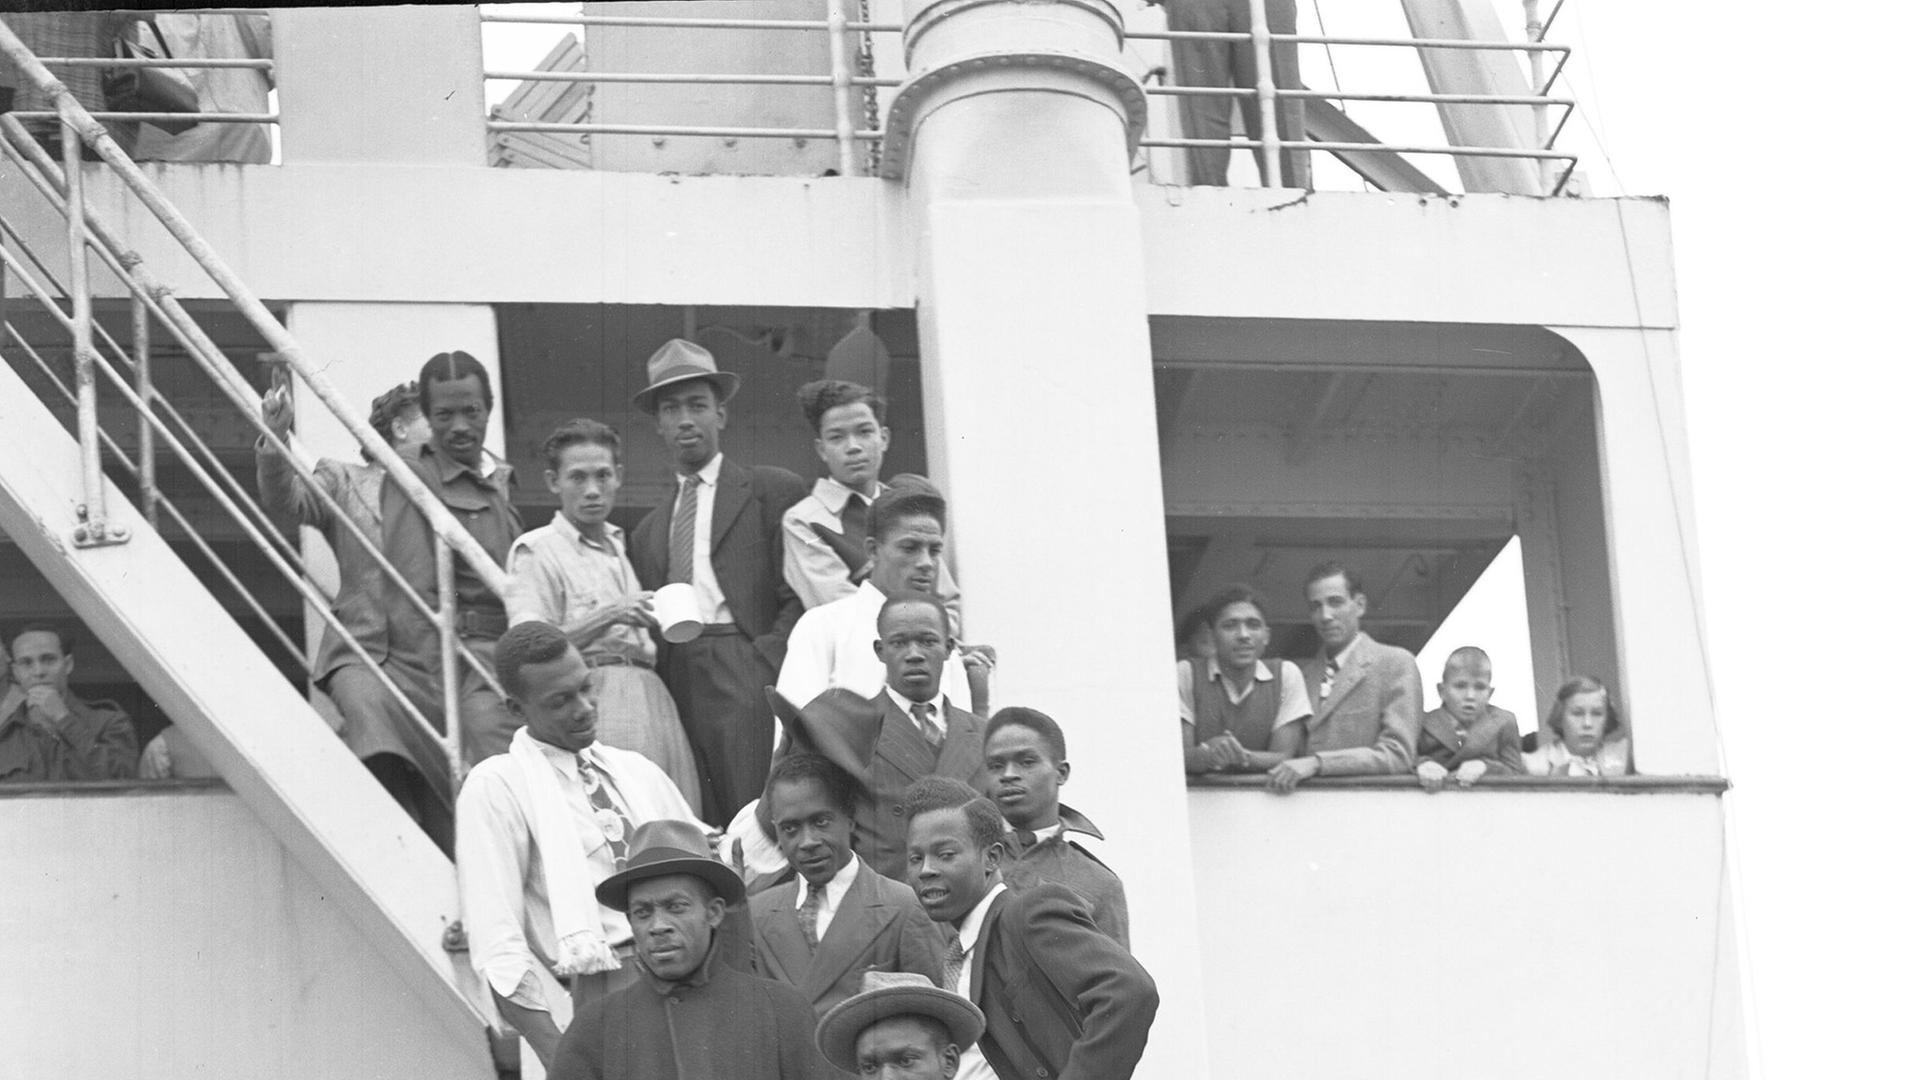 Some of the Jamaican men, mostly ex Royal Air Force servicemen, aboard the former troopship, S.S. Empire Windrush, before disembarking at Tilbury Docks, England, on June 22, 1948. They have come to Britain seeking employment. (AP Photo/Staff/Worth) 